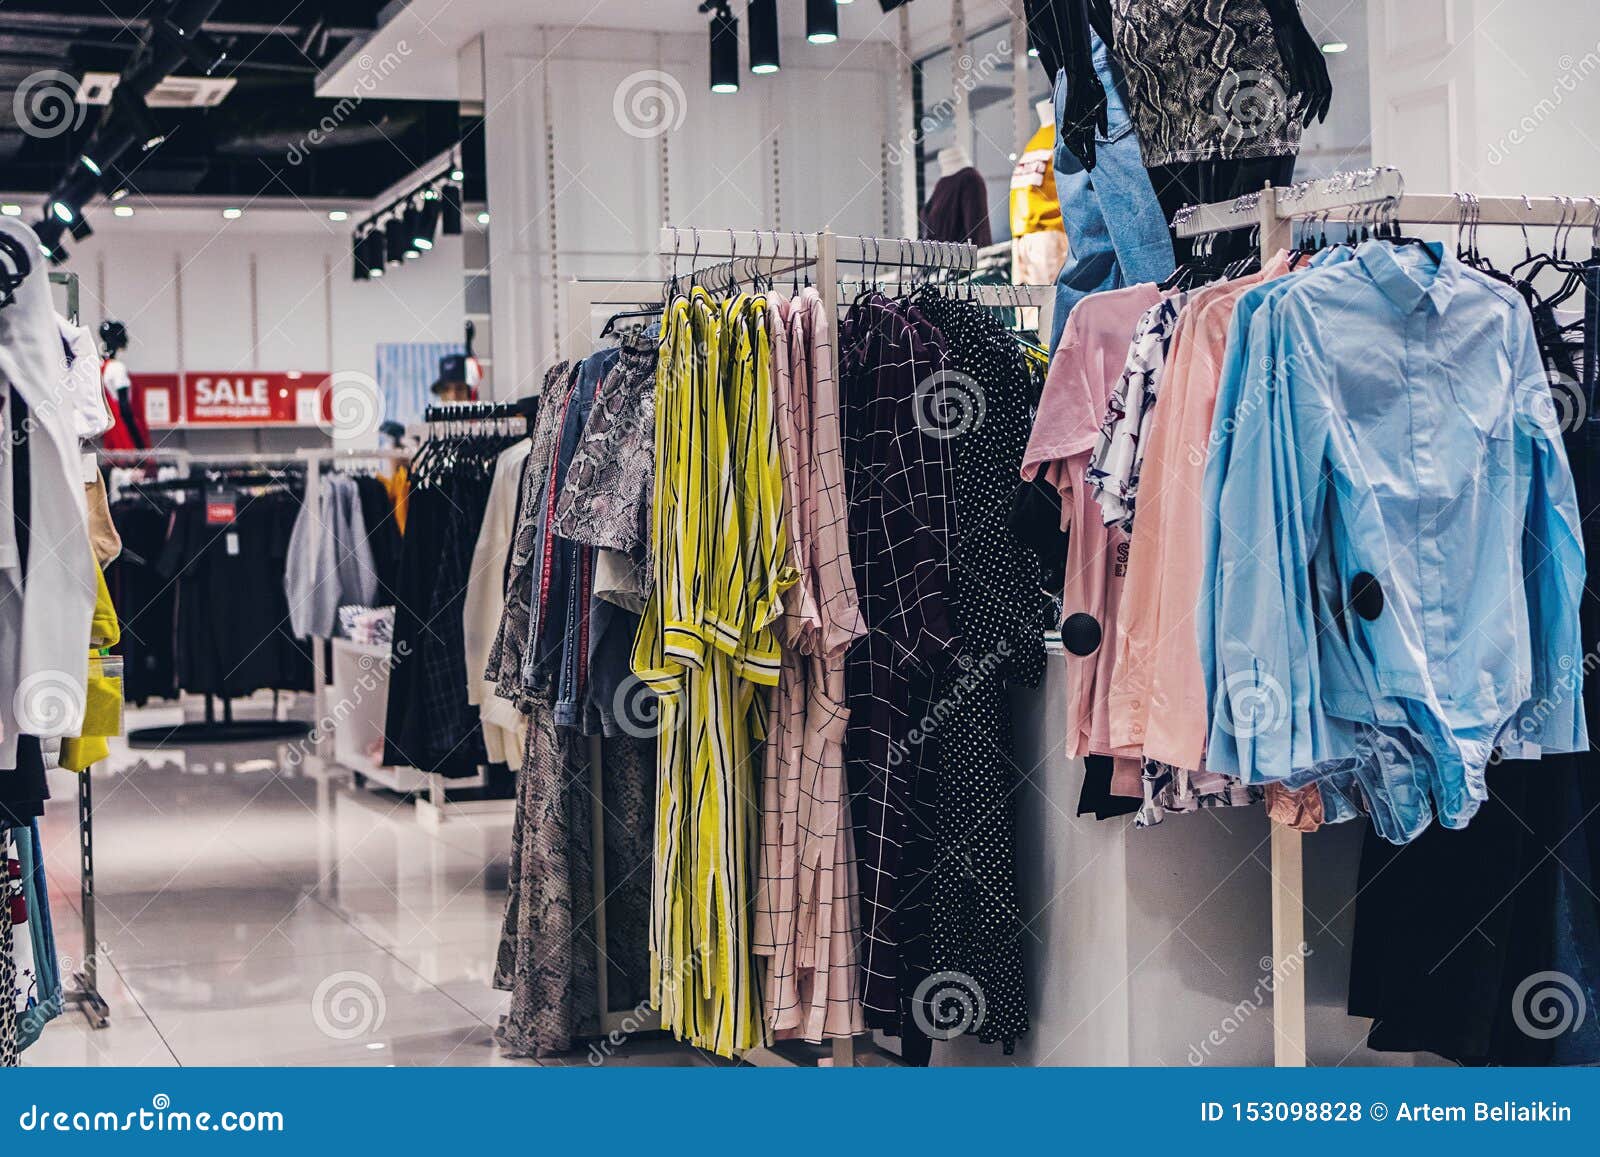 Women Clothes Hanging in the Fashion Store. Shopping Mall Stock